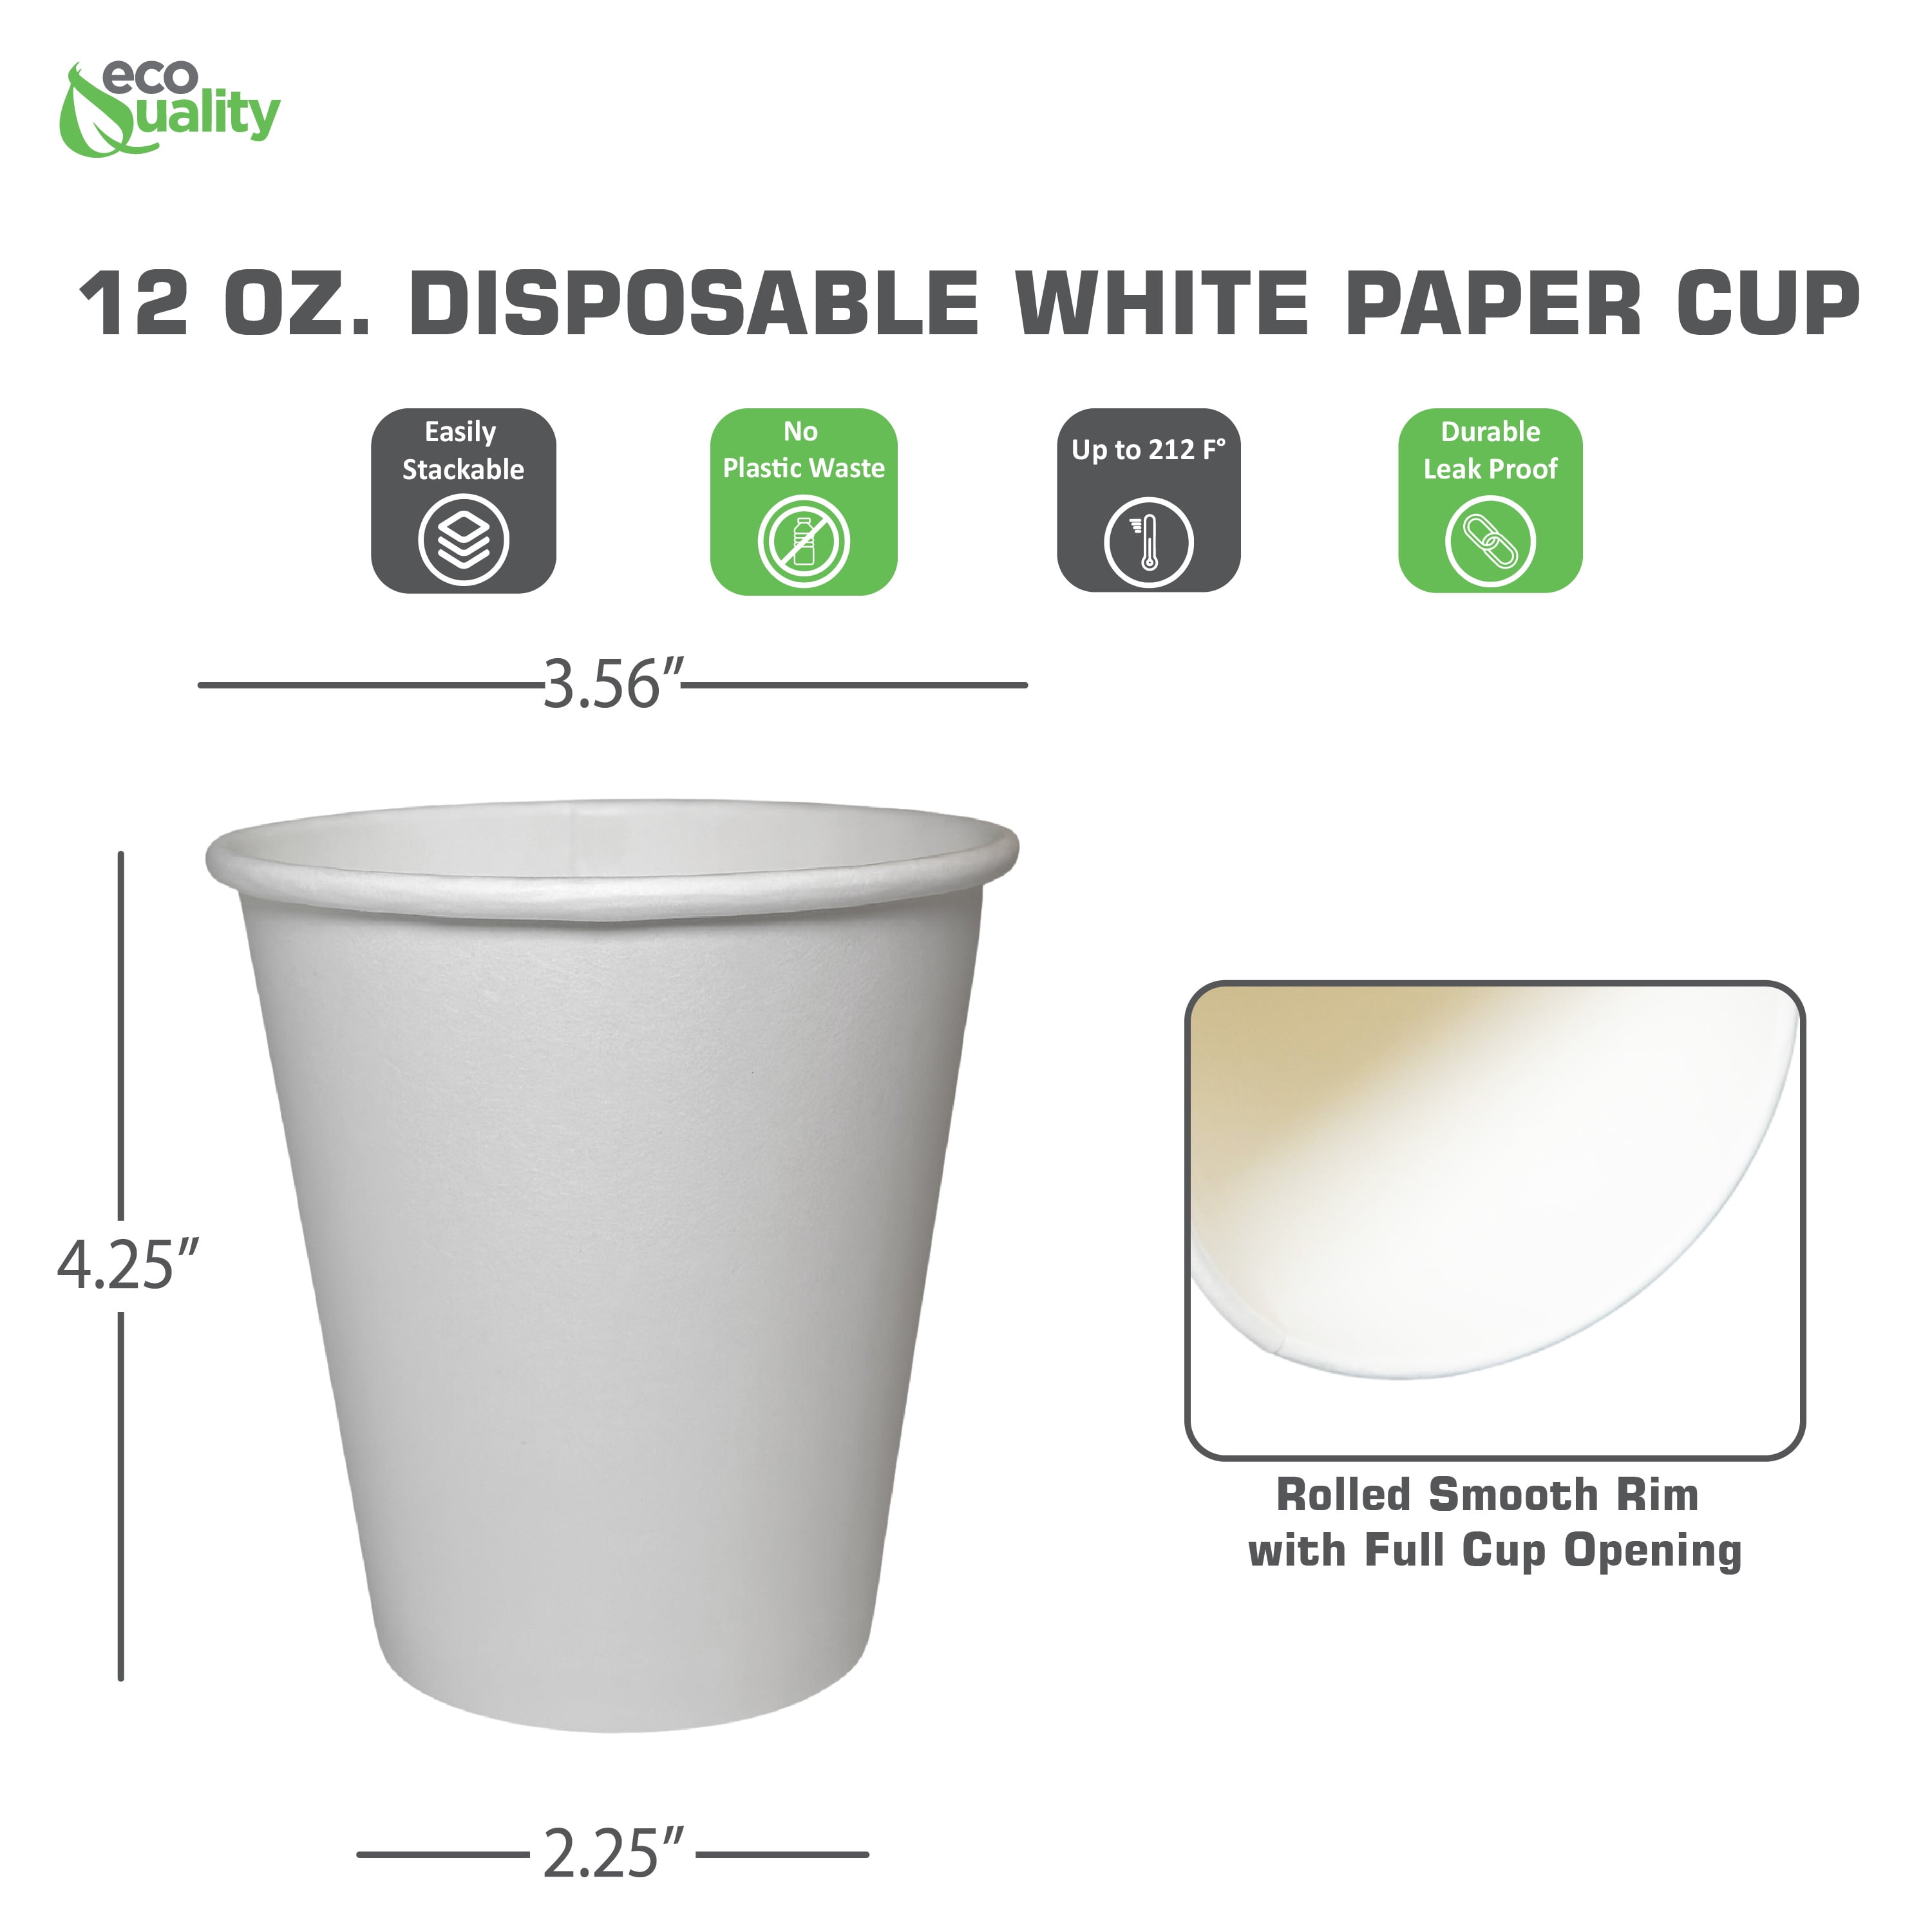 Tebery 300 Pack White Paper Coffee Cups 6oz Disposable Paper Cup for Water,  Juice, Coffee or Tea